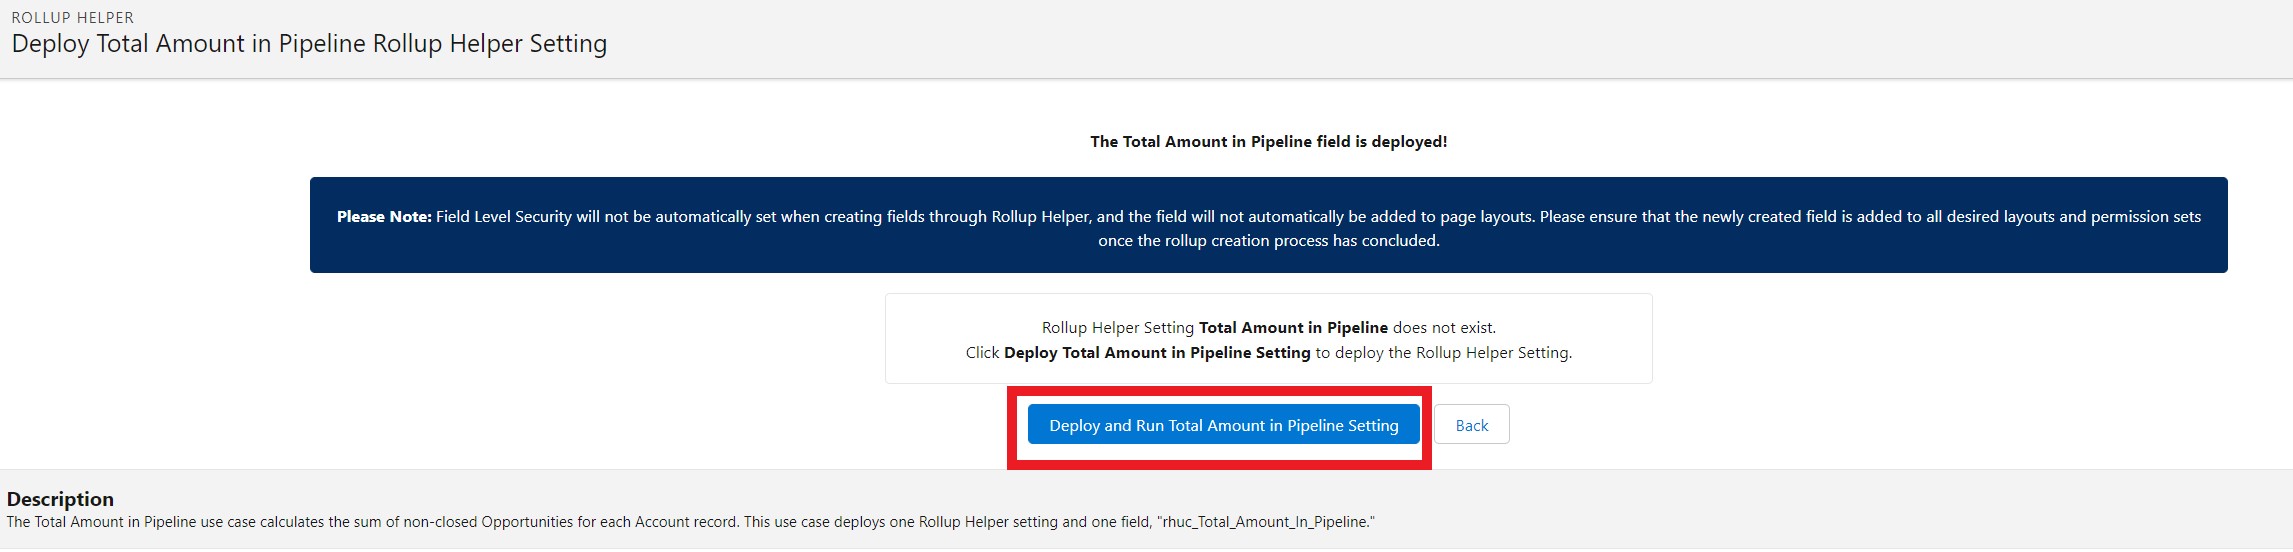 Total Amount in Pipeline deploy setting